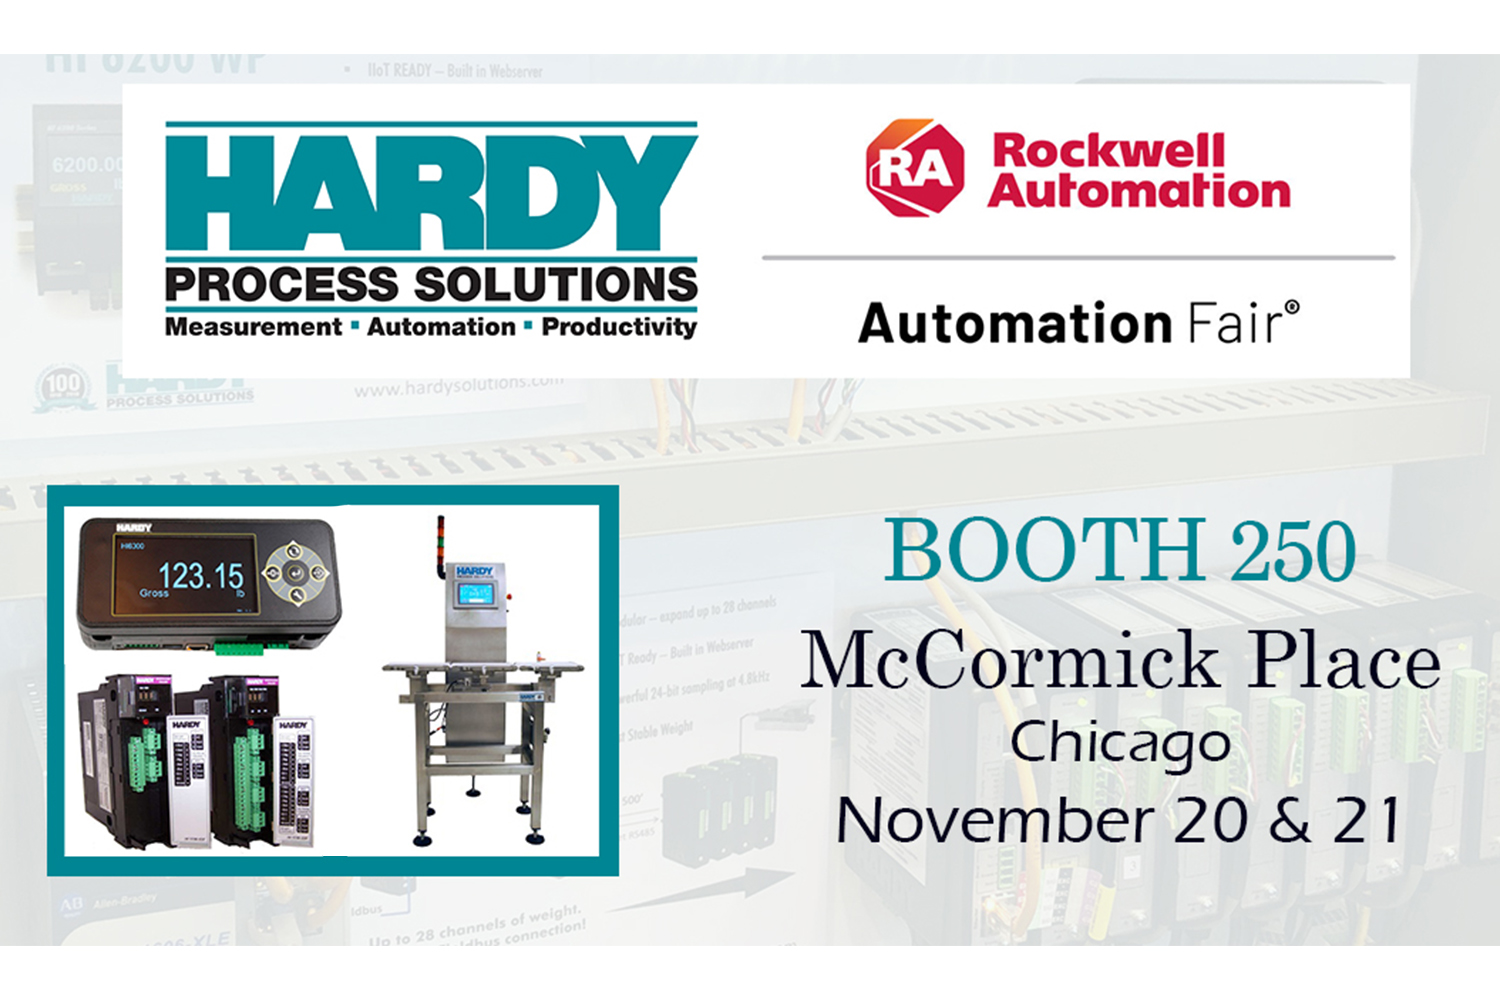 Visit Hardy at the Rockwell Automation Show